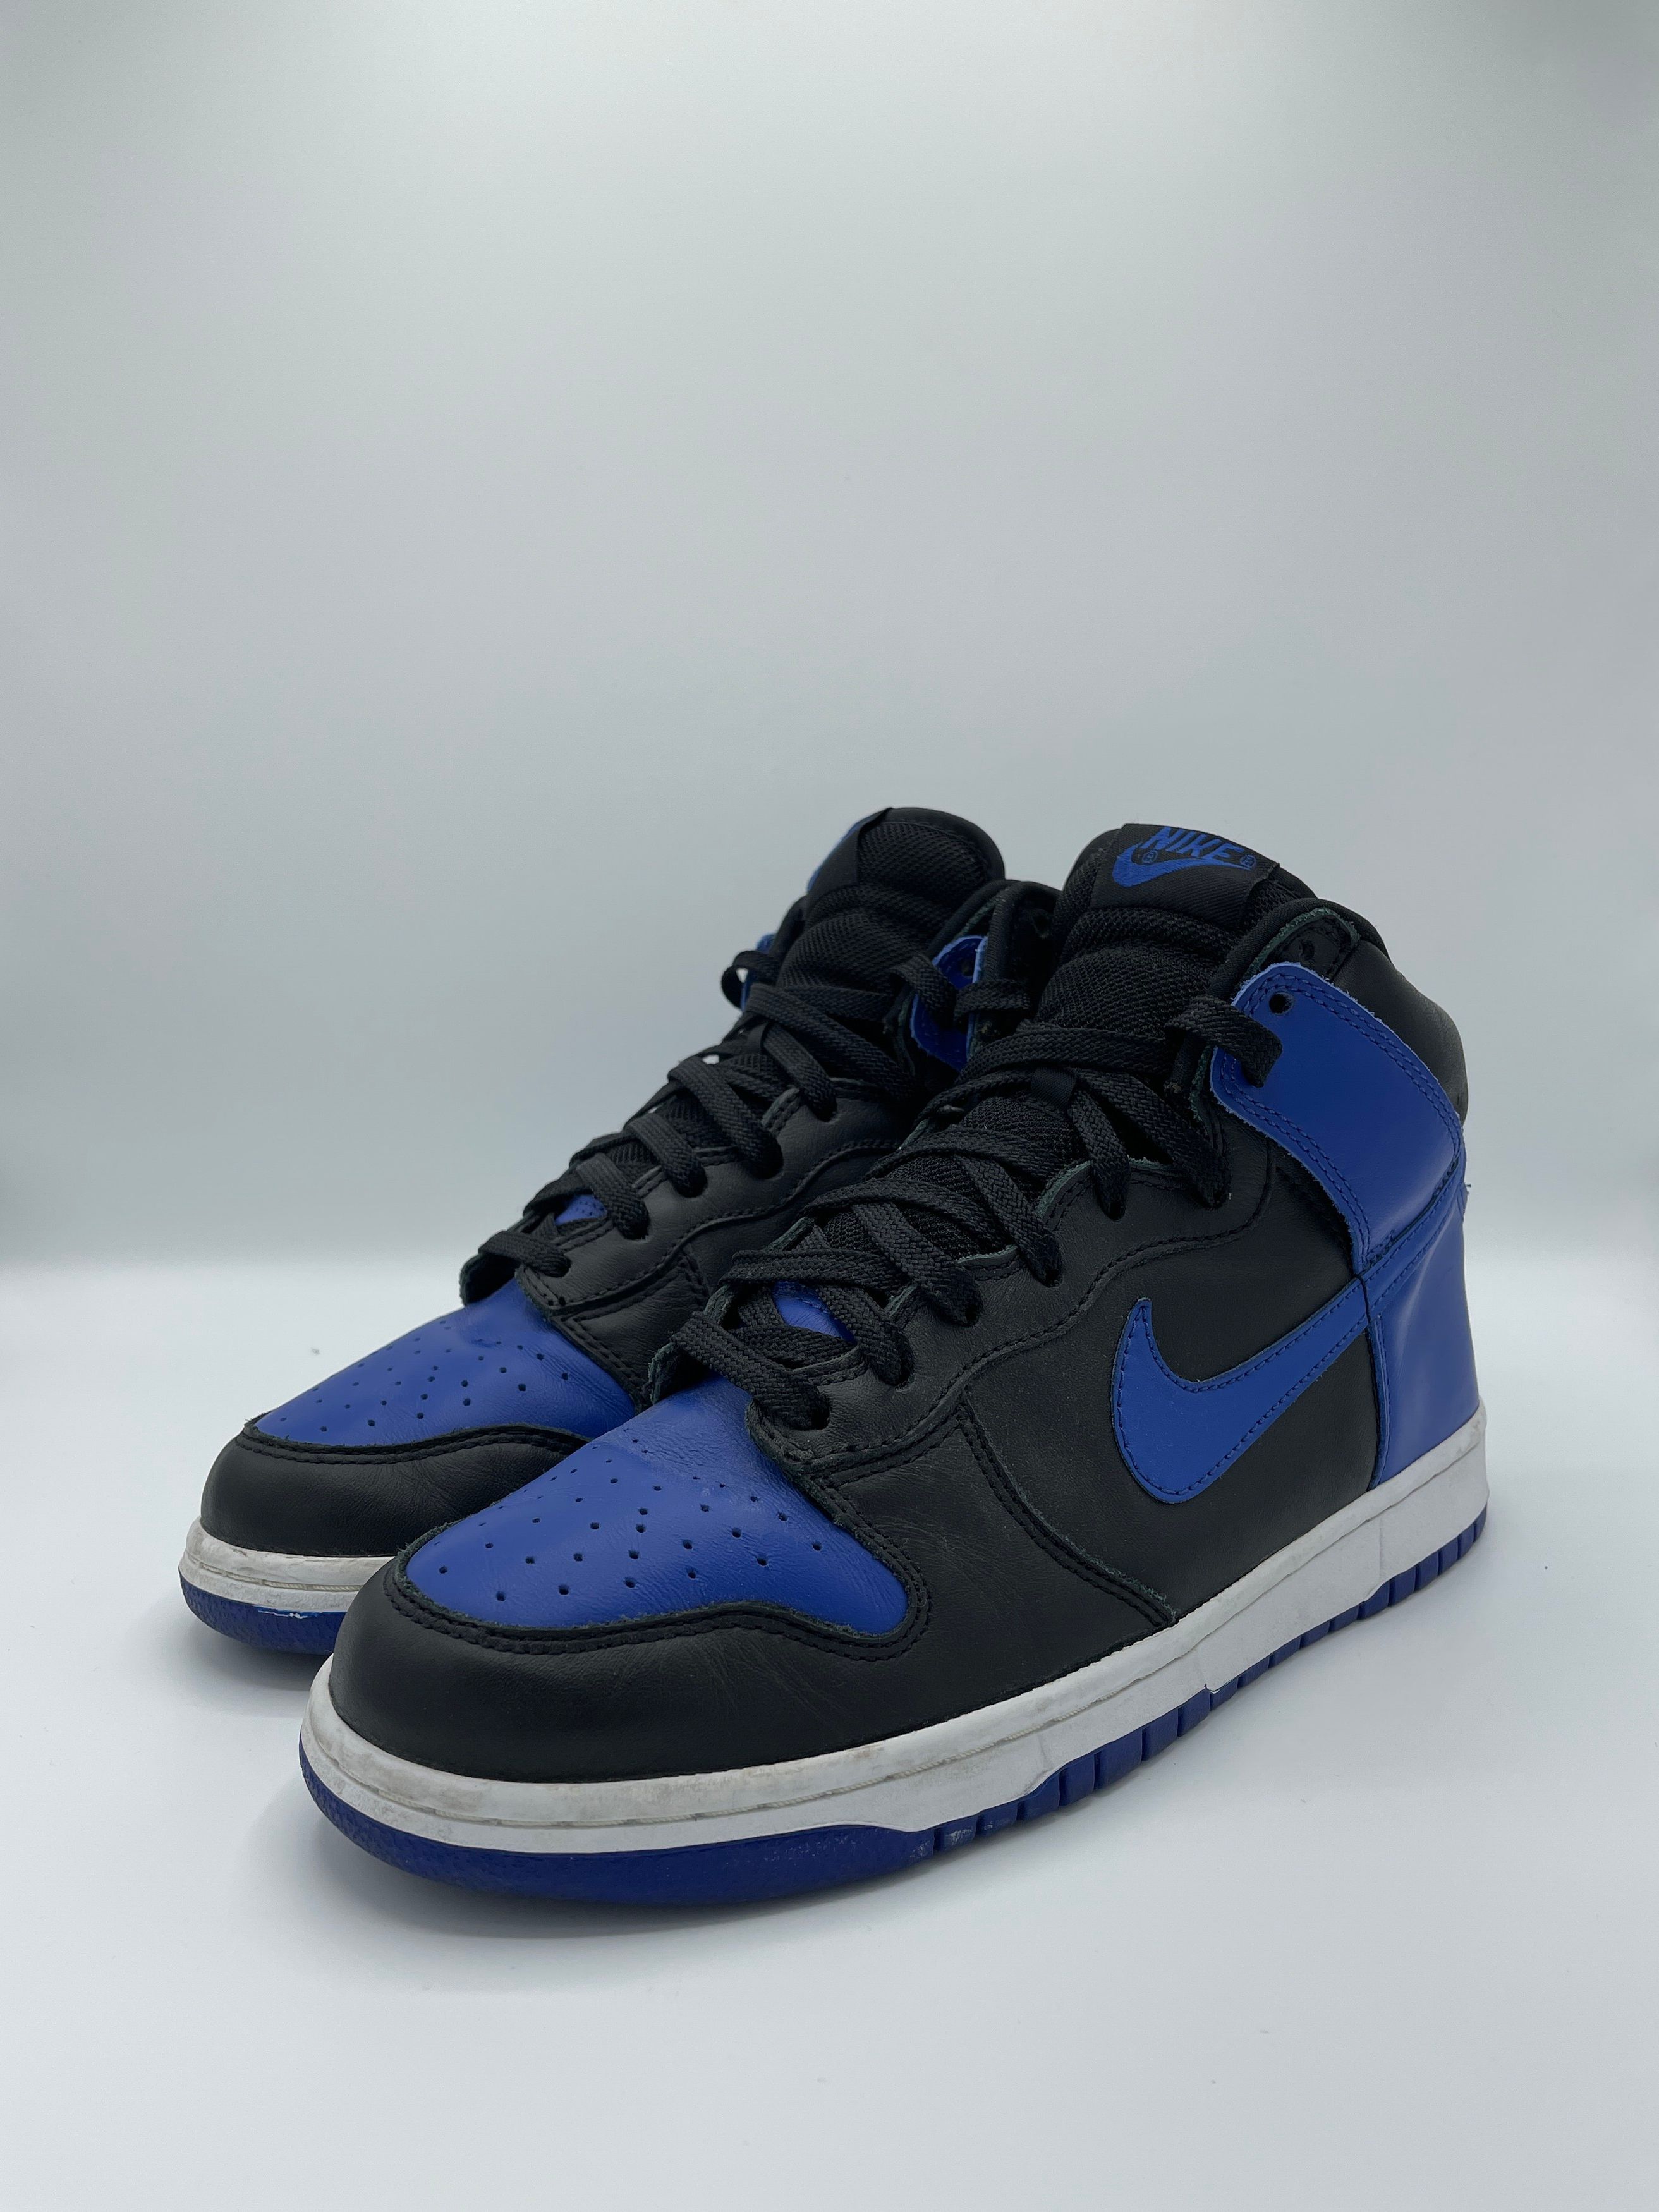 Pre-owned Nike 2004  Dunk High Royal Blue Black Shoes